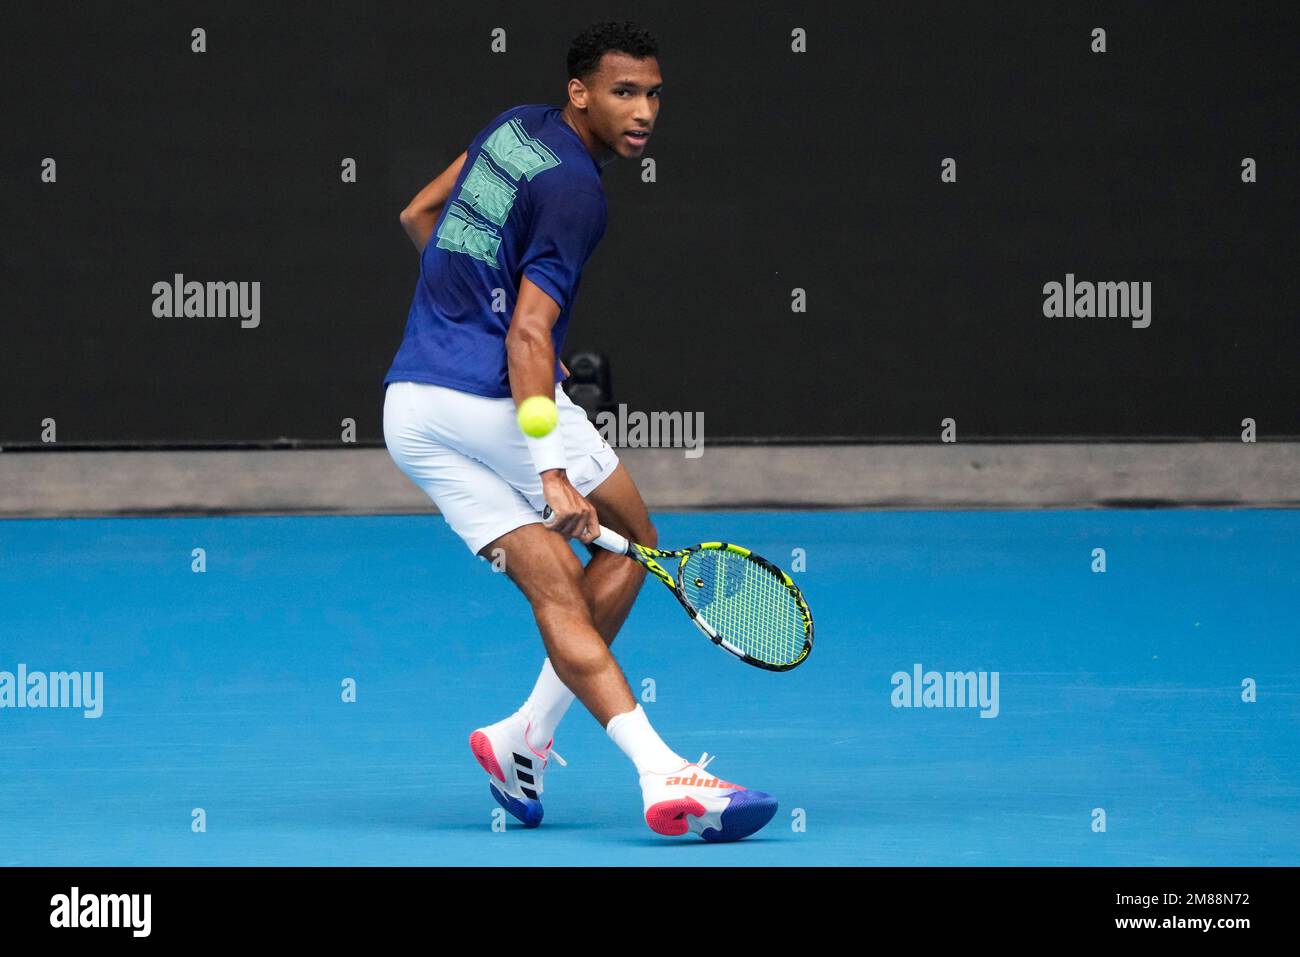 Canadas Felix Auger-Aliassime plays a backhand return to Spains Rafael Nadal during a practice session on Rod Laver Arena ahead of the Australian Open tennis championship in Melbourne, Australia, Friday, Jan